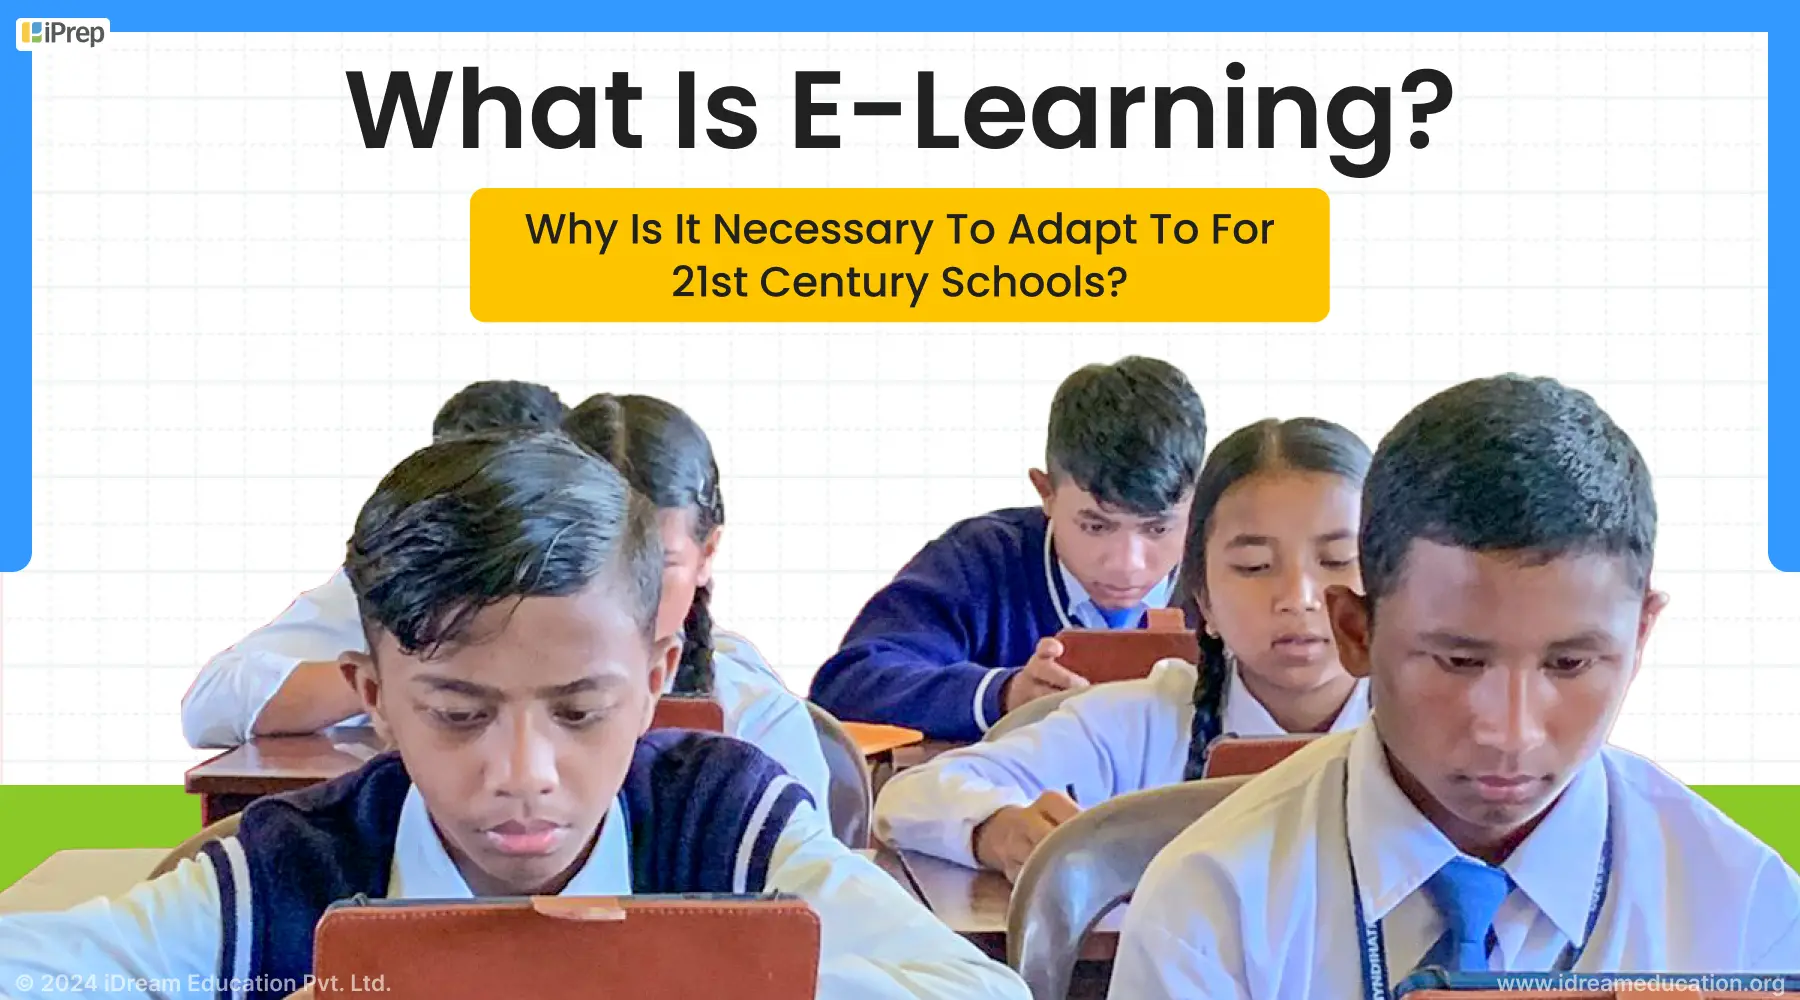 An image asking the question of the hour- What is E-Learning and why is it necessary for schools?